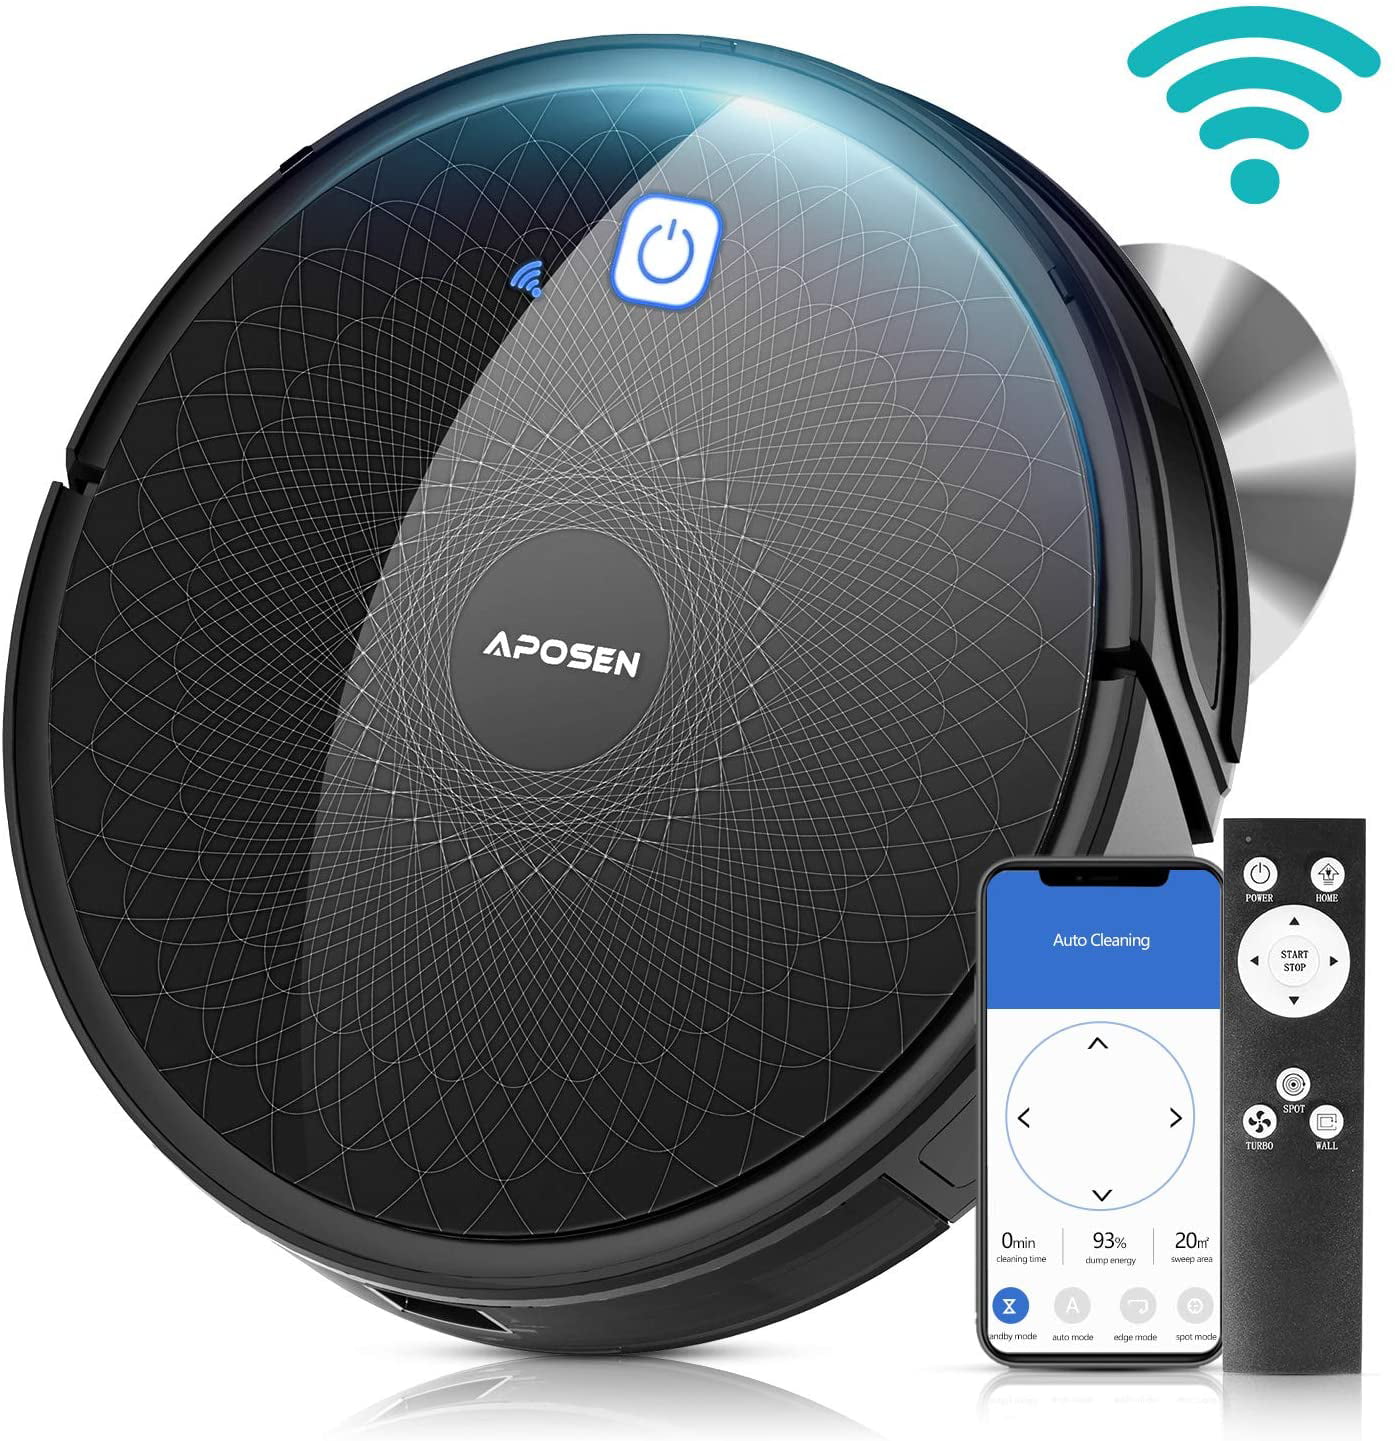 Smart WiFi Mapping Robot Vacuum Cleaner APOSEN Robot Vacuum Carpet Hard Floor 2200Pa Strong Suction But Quiet Robotic Vacuum Cleaner with Self Charging Ideal for Pet Hair